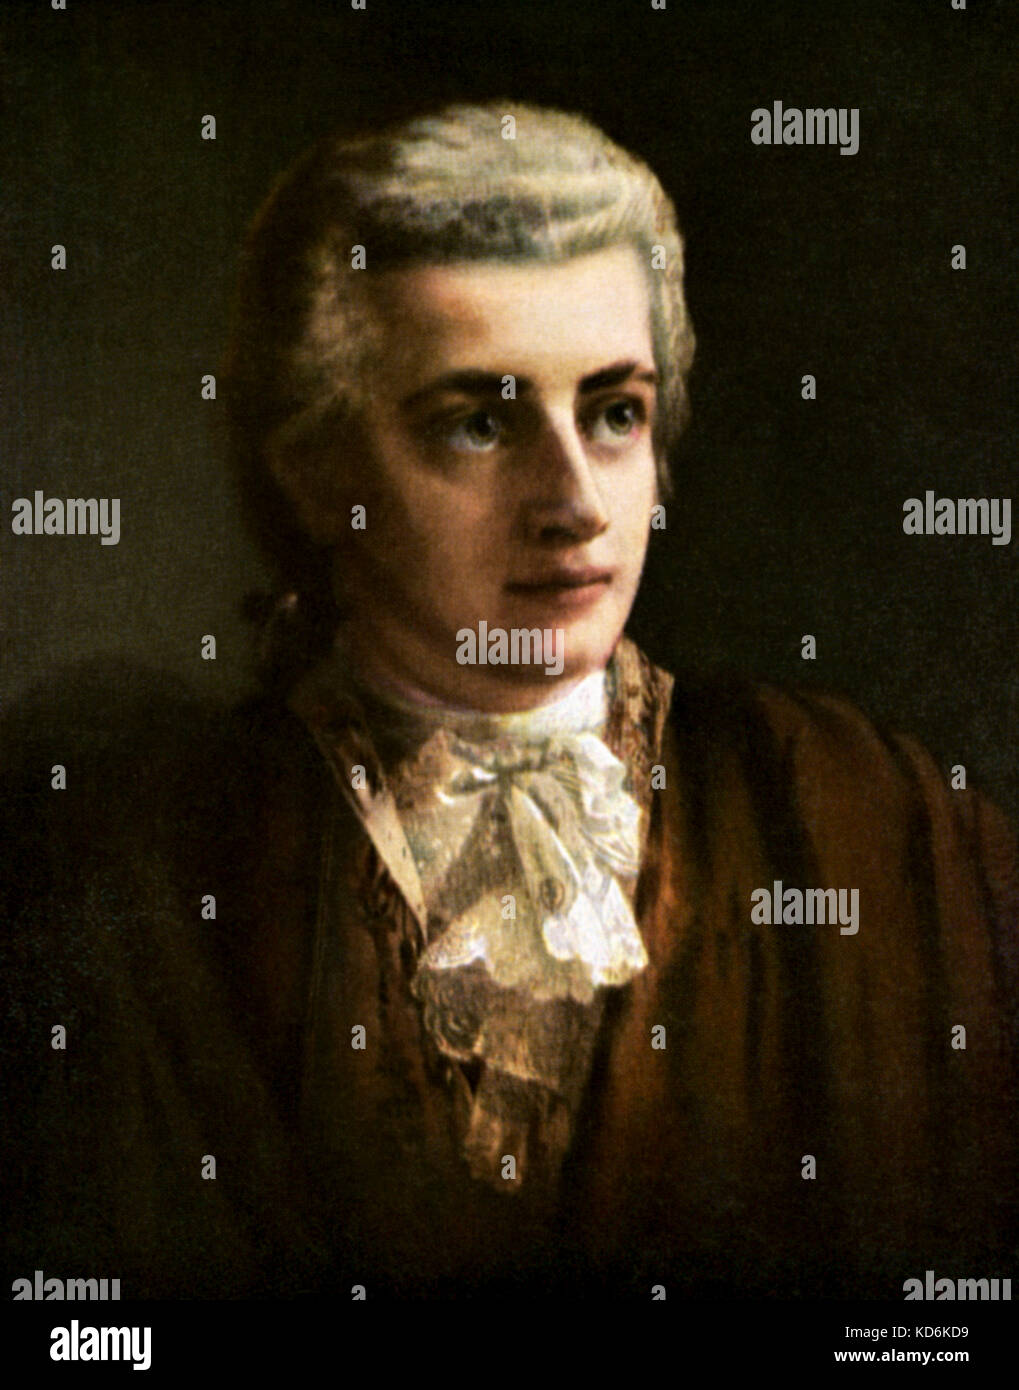 Wolfgang Amadeus Mozart - portrait of Austrian composer as a young man, by  Vogel. 1756-1791 Stock Photo - Alamy